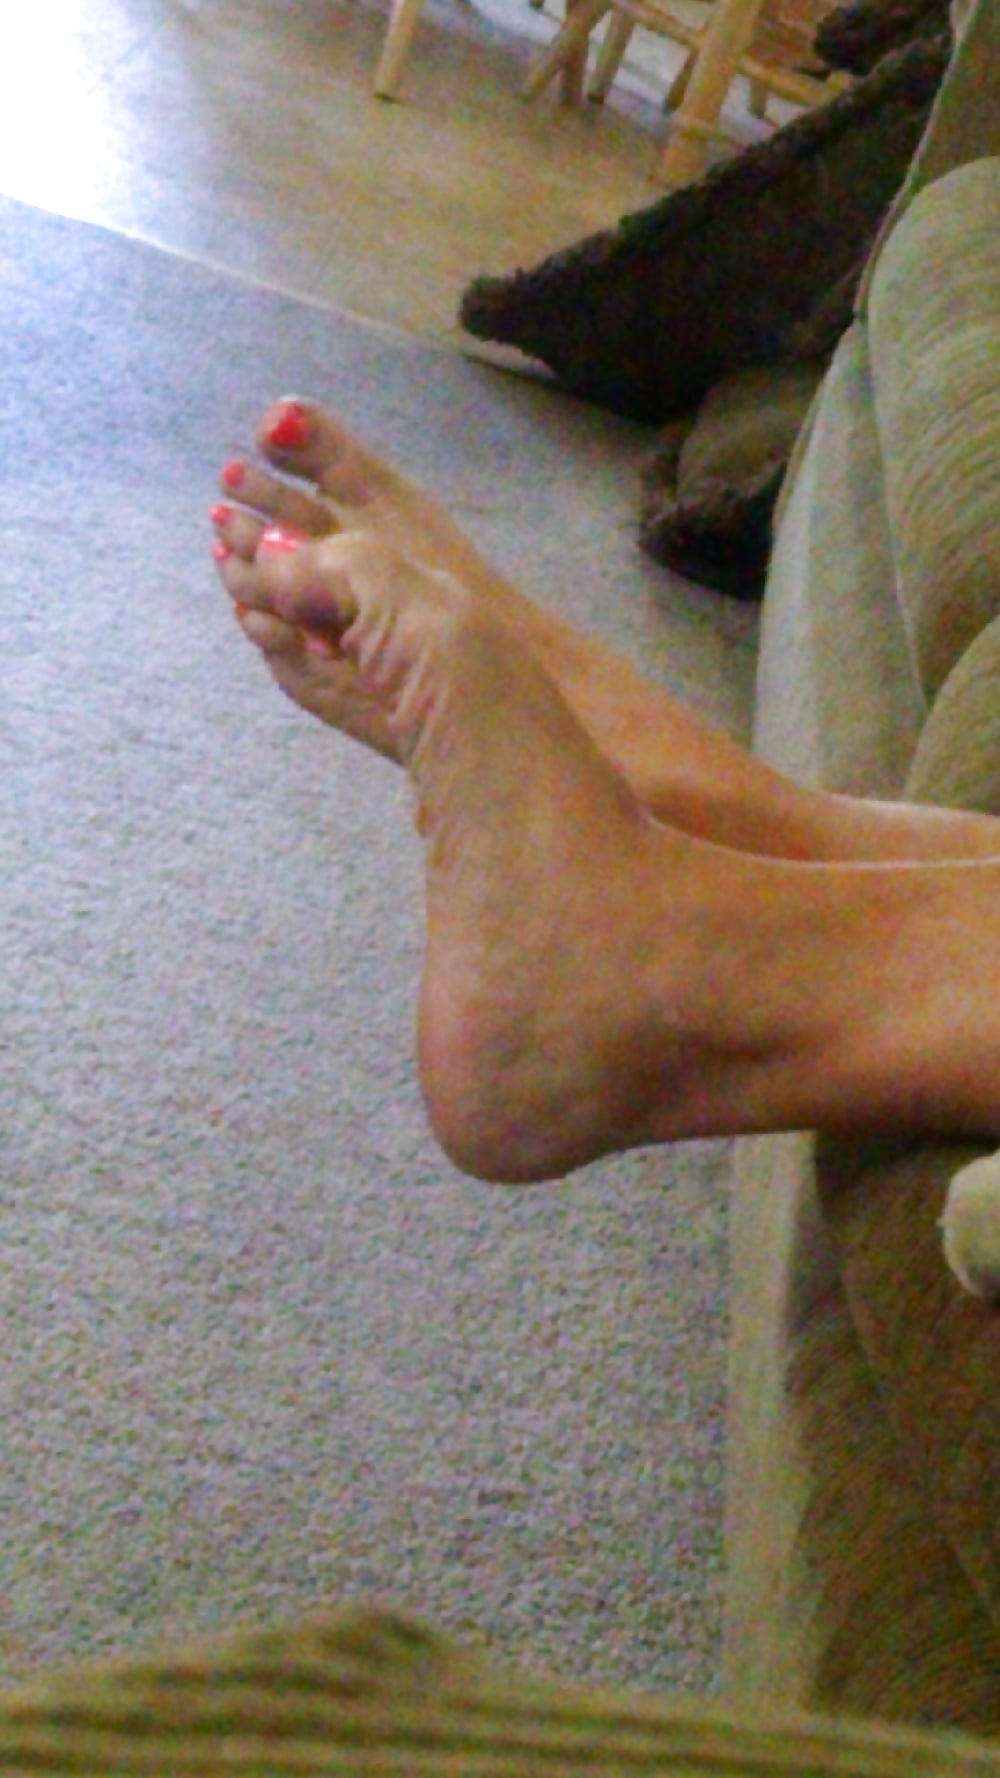 Porn Pics comment on my sexy girls feet pics